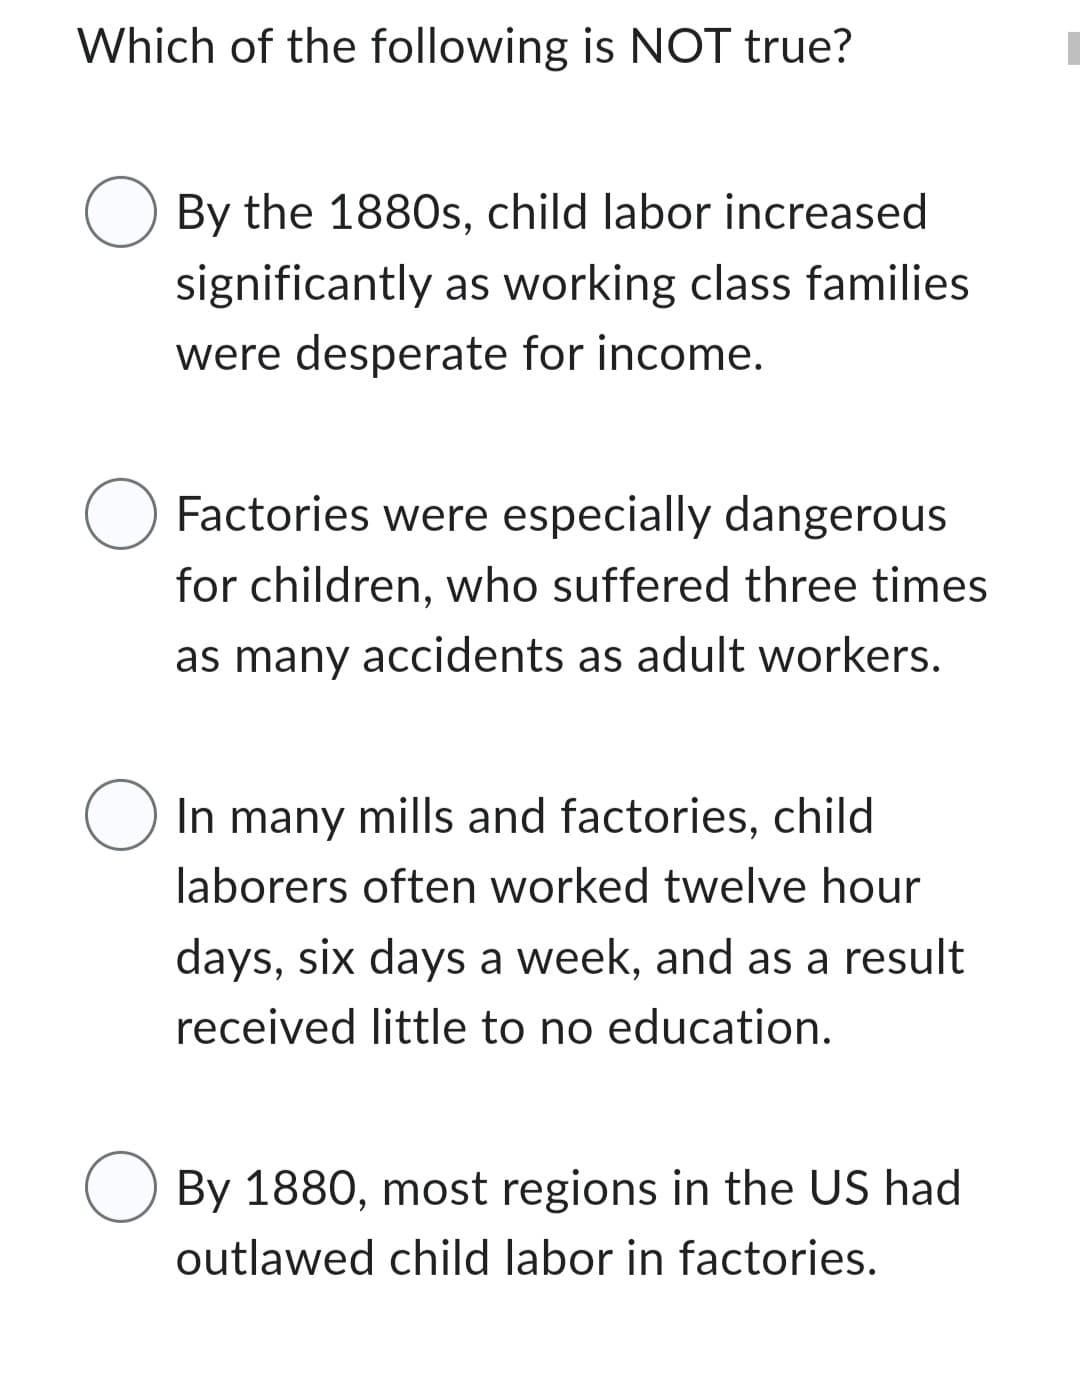 Which of the following is NOT true?
O
O
O
O
By the 1880s, child labor increased
significantly as working class families
were desperate for income.
Factories were especially dangerous
for children, who suffered three times
as many accidents as adult workers.
In many mills and factories, child
laborers often worked twelve hour
days, six days a week, and as a result
received little to no education.
By 1880, most regions in the US had
outlawed child labor in factories.